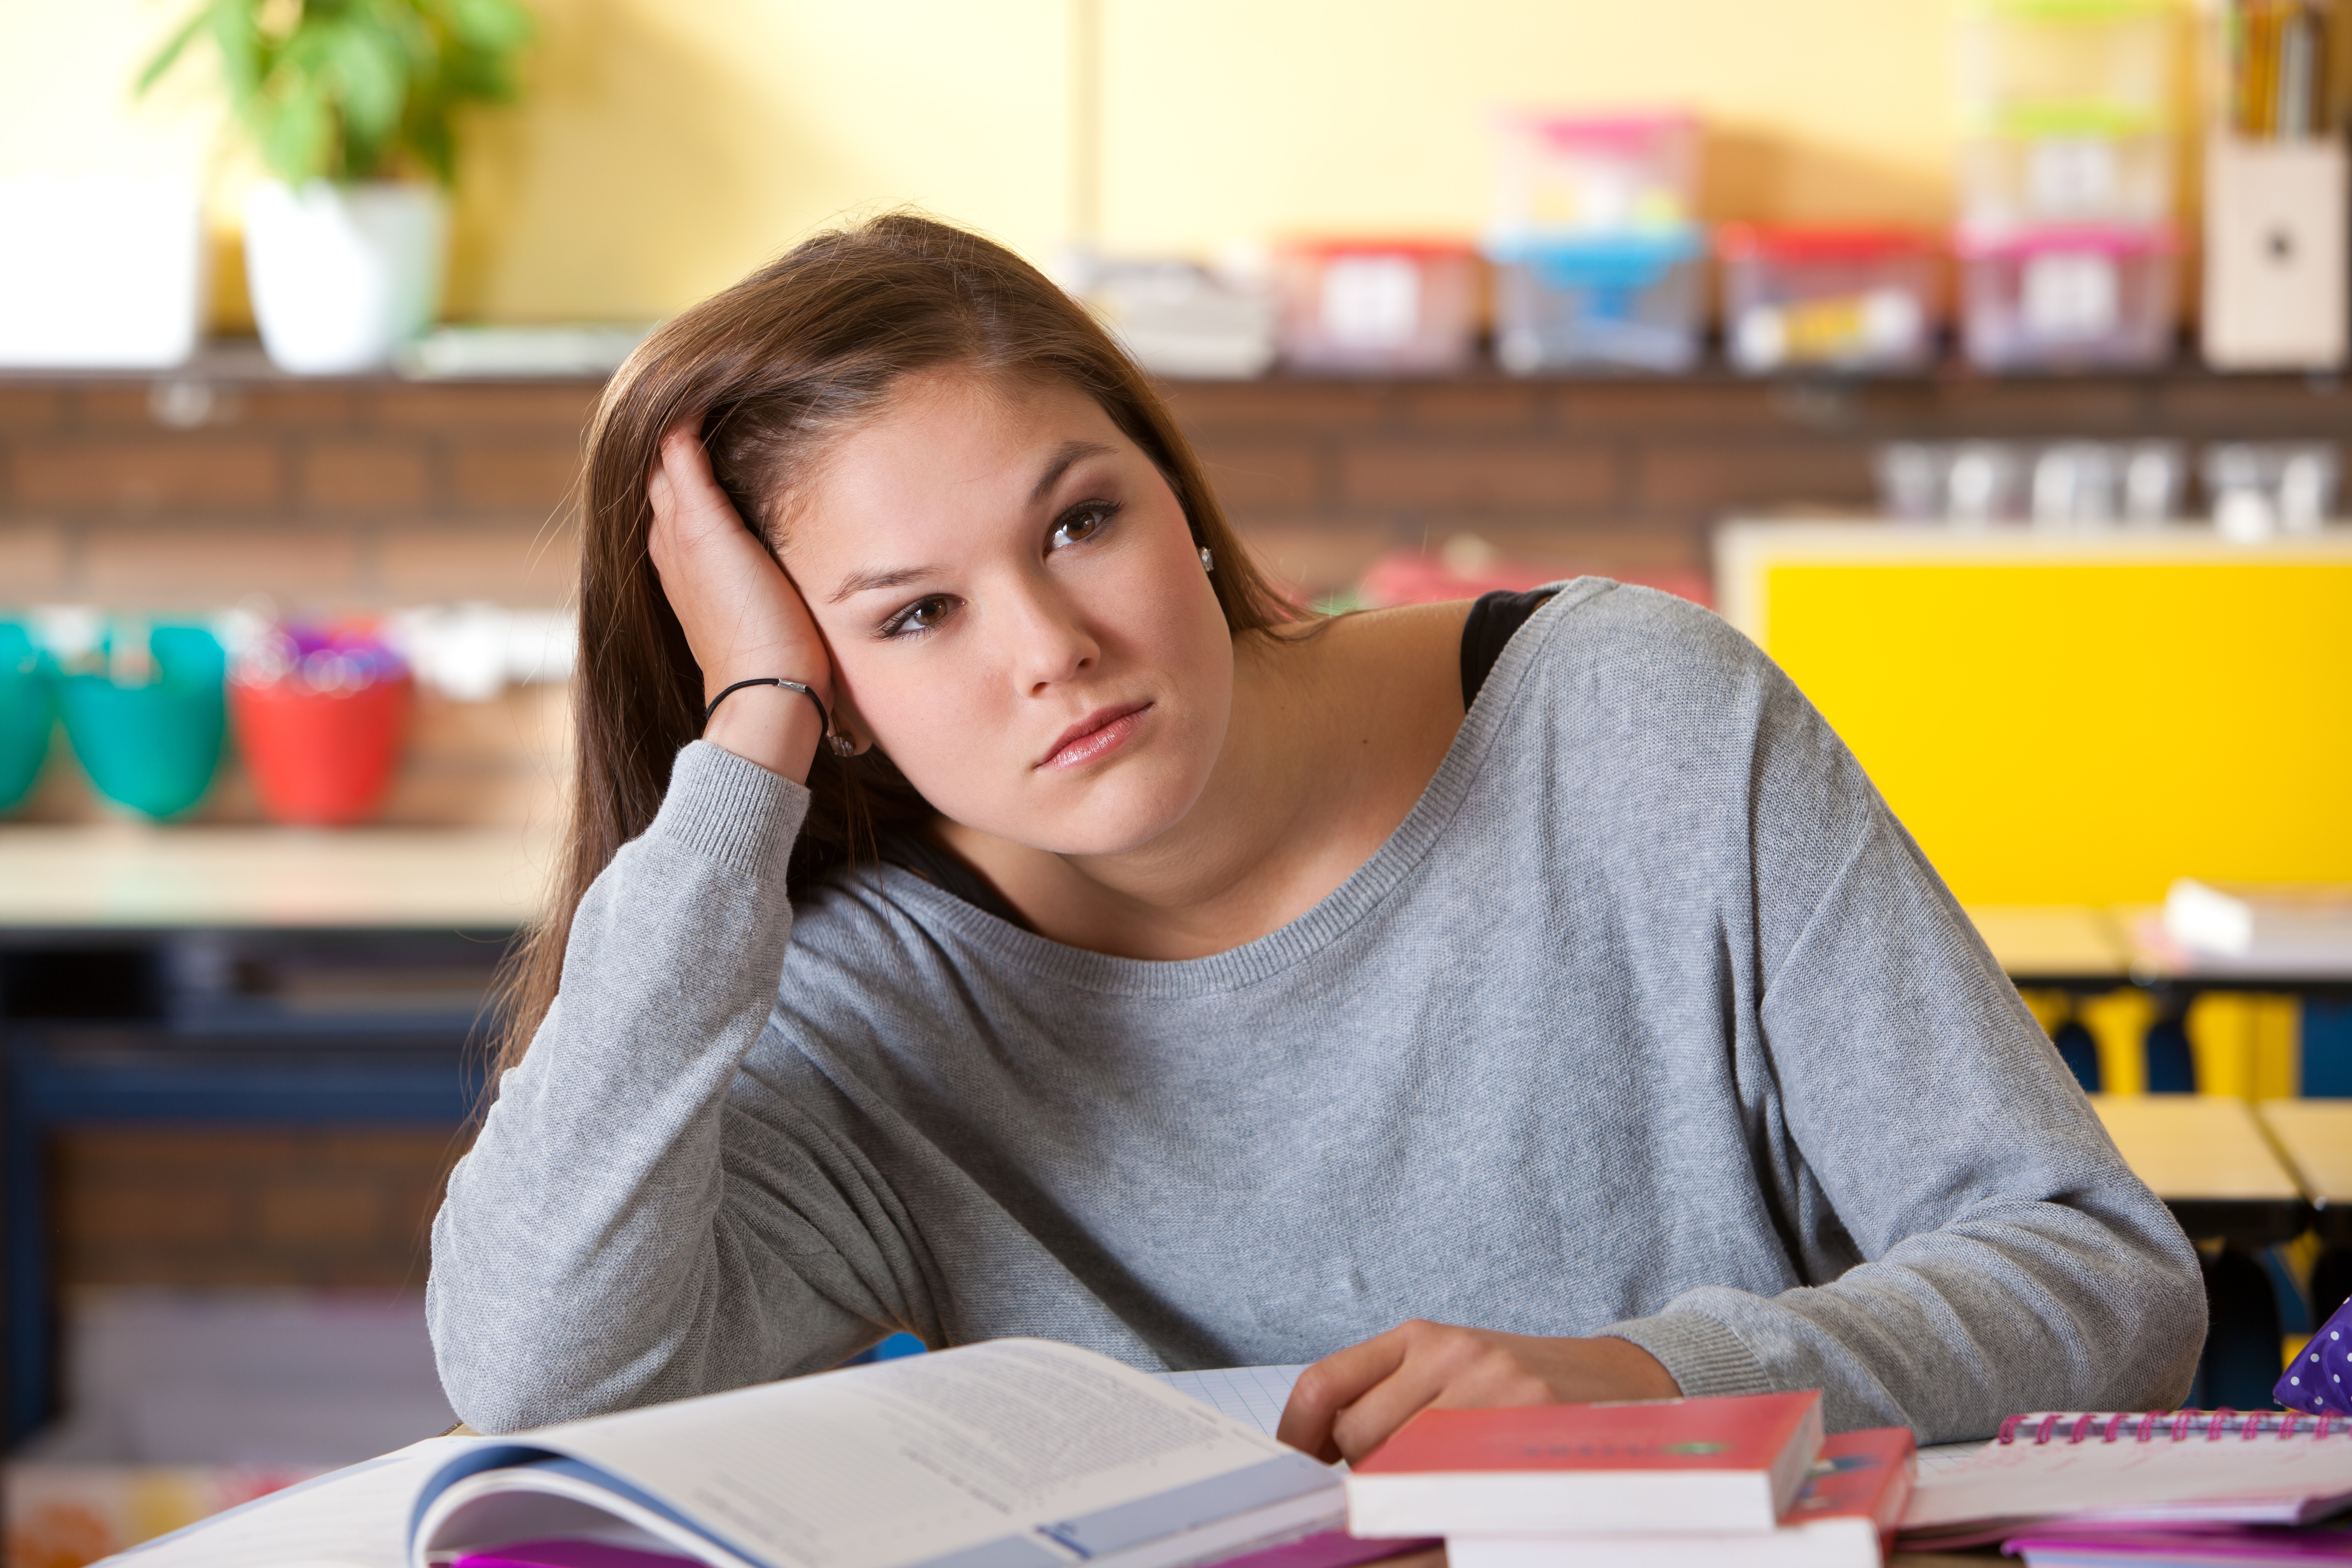 A student rests her head on her hand, looking tired or frustrated, with books open in front of her